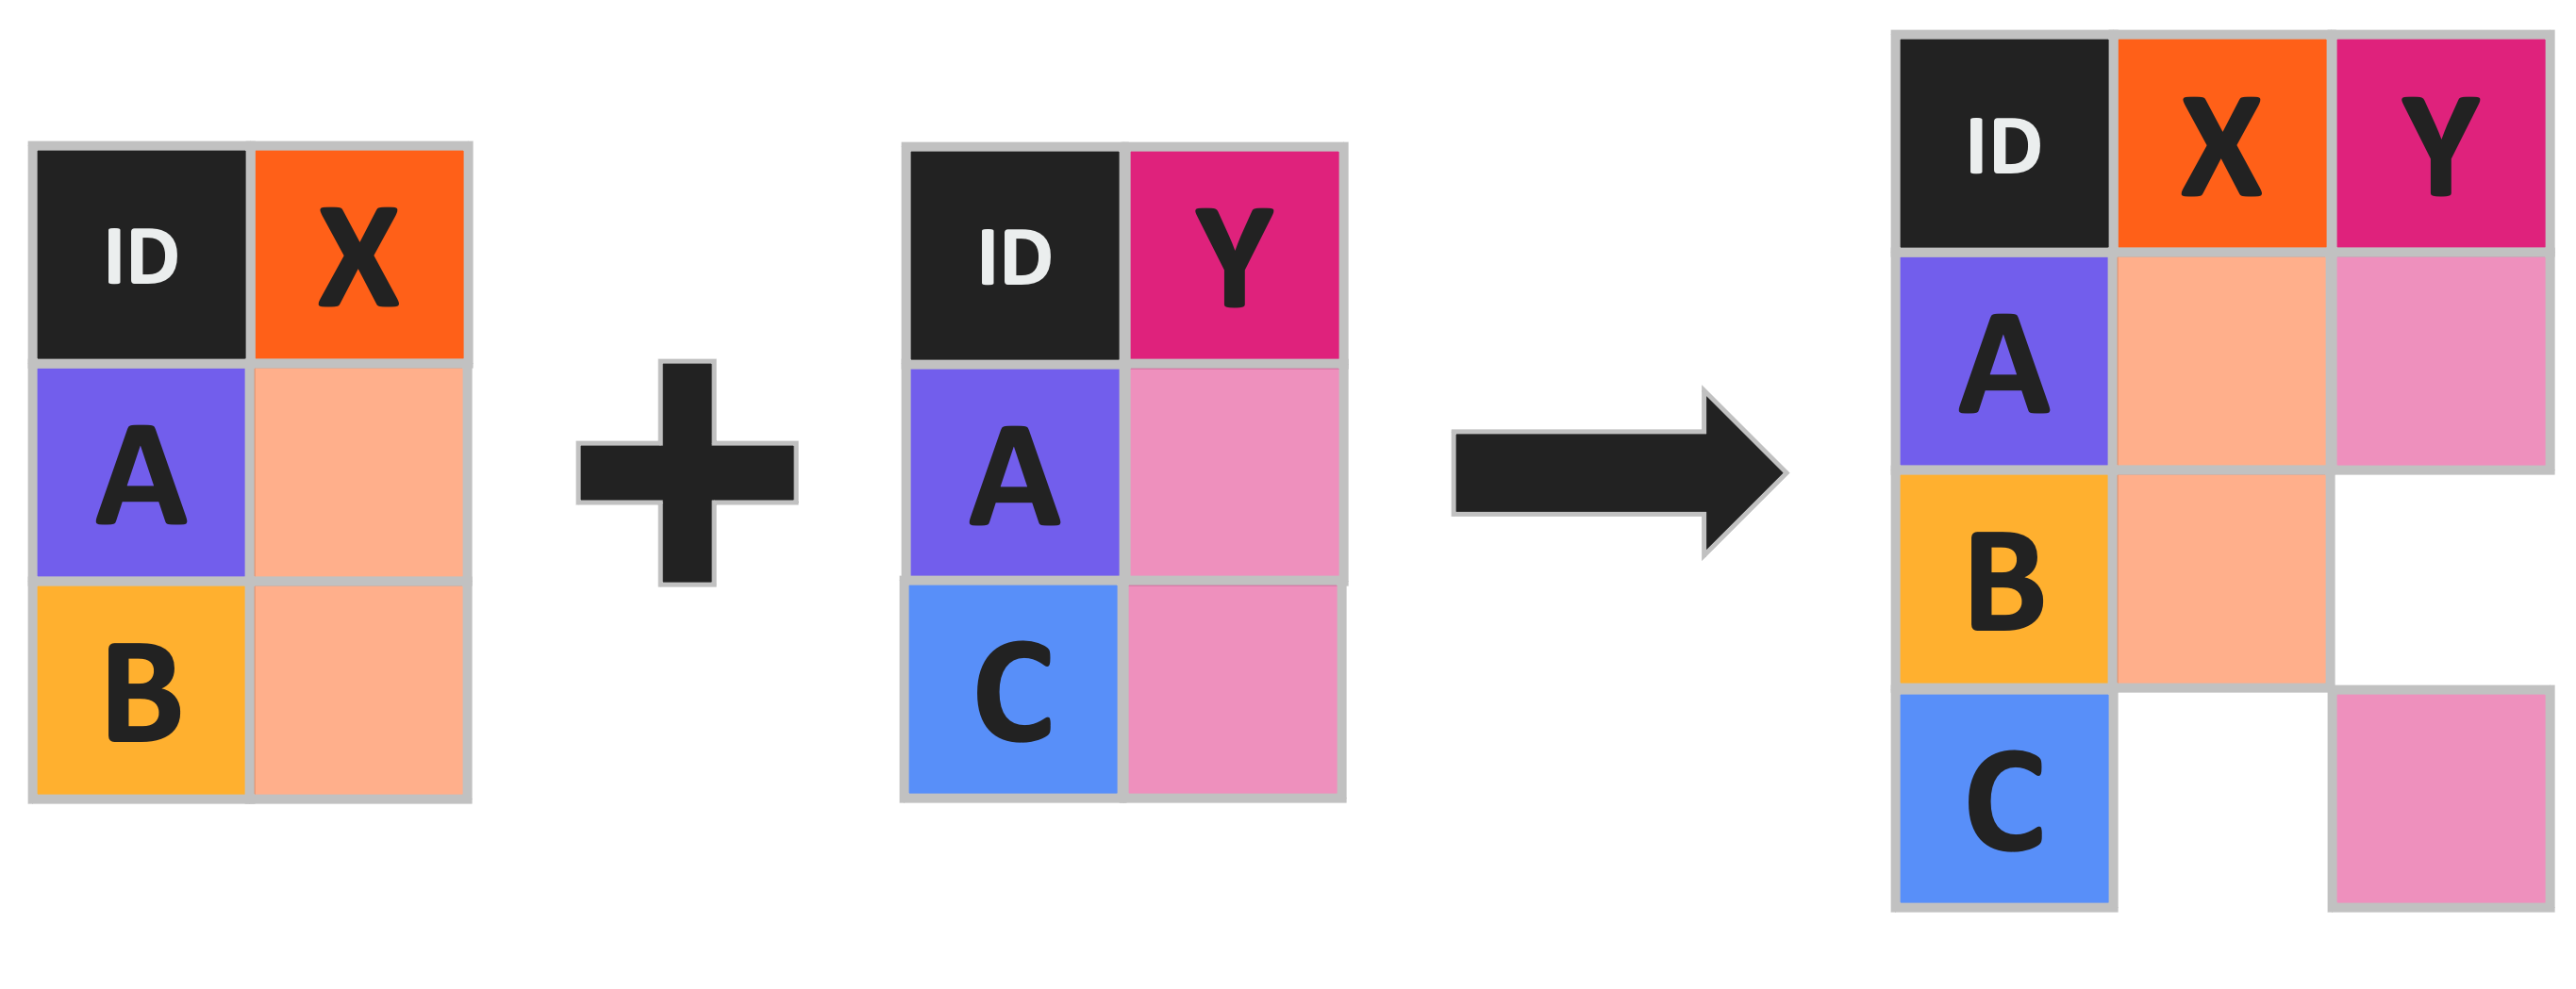 Table with an 'X' column and 'A' and 'B' rows gets joined with a second table with a 'Y' column and 'A' and 'C' rows to produce a single table with 'X' and Y' columns and 'A', 'B', and 'C' rows